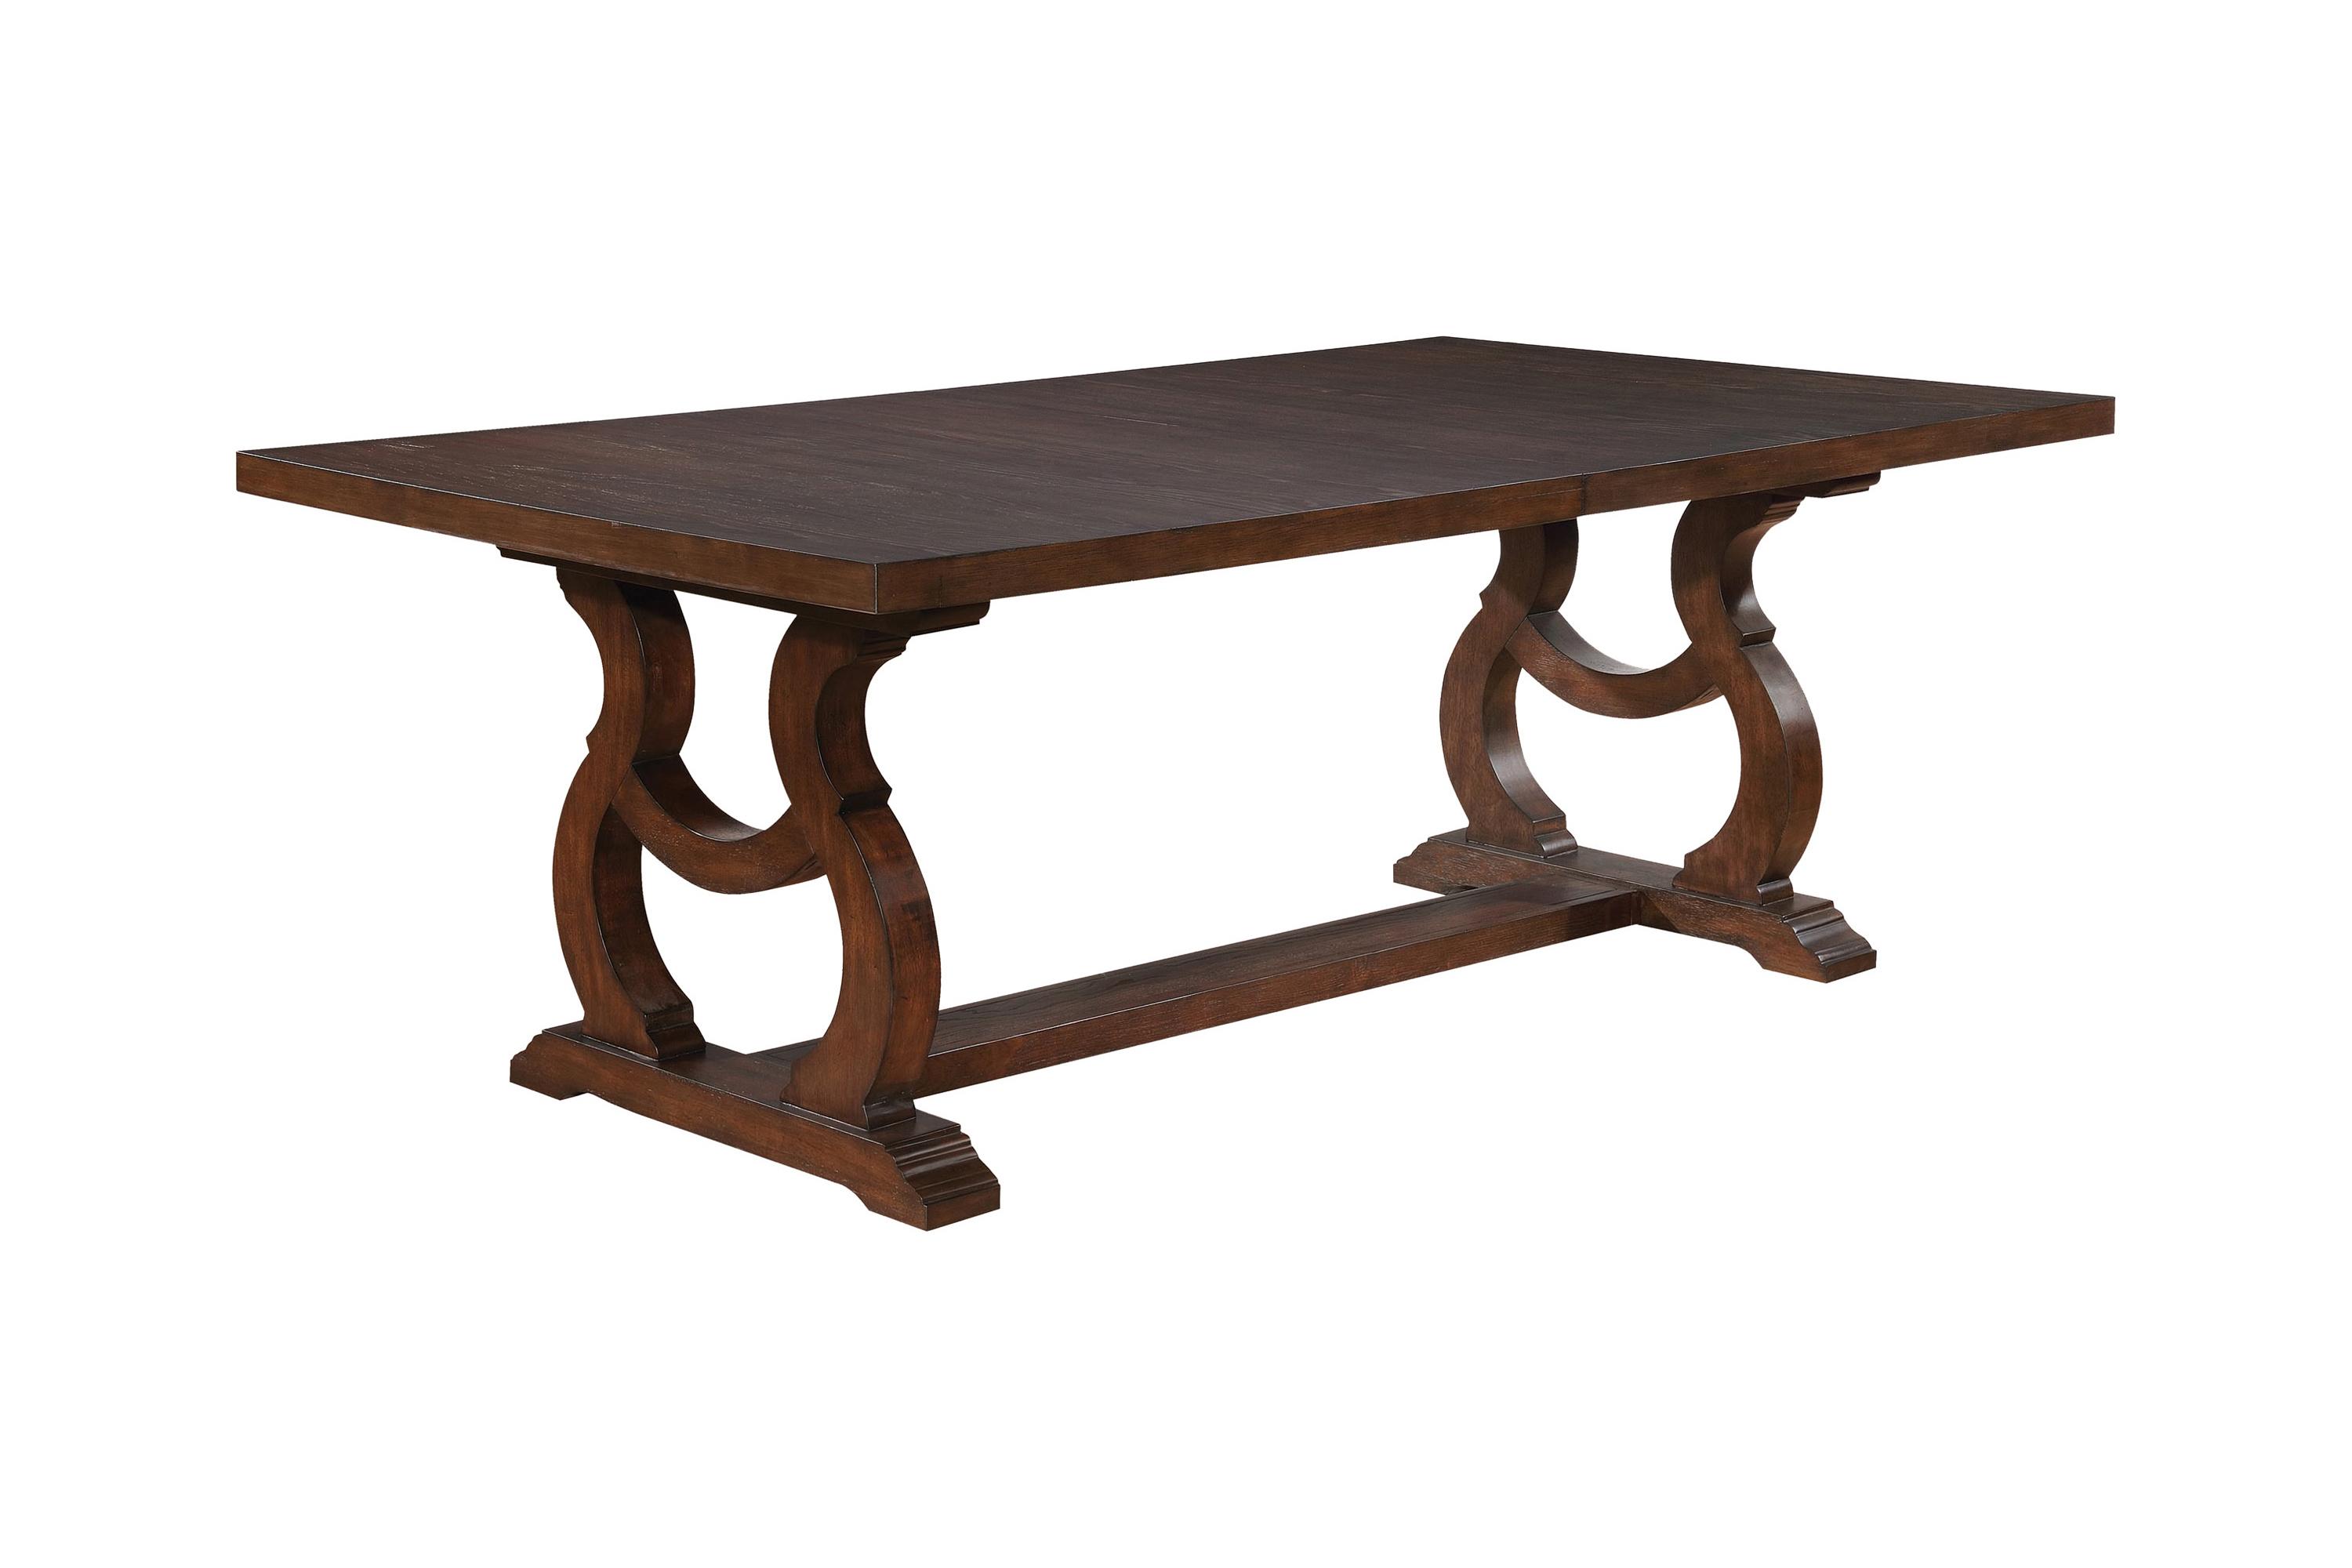 Transitional Dining Table 110311 Brockway 110311 in Java 